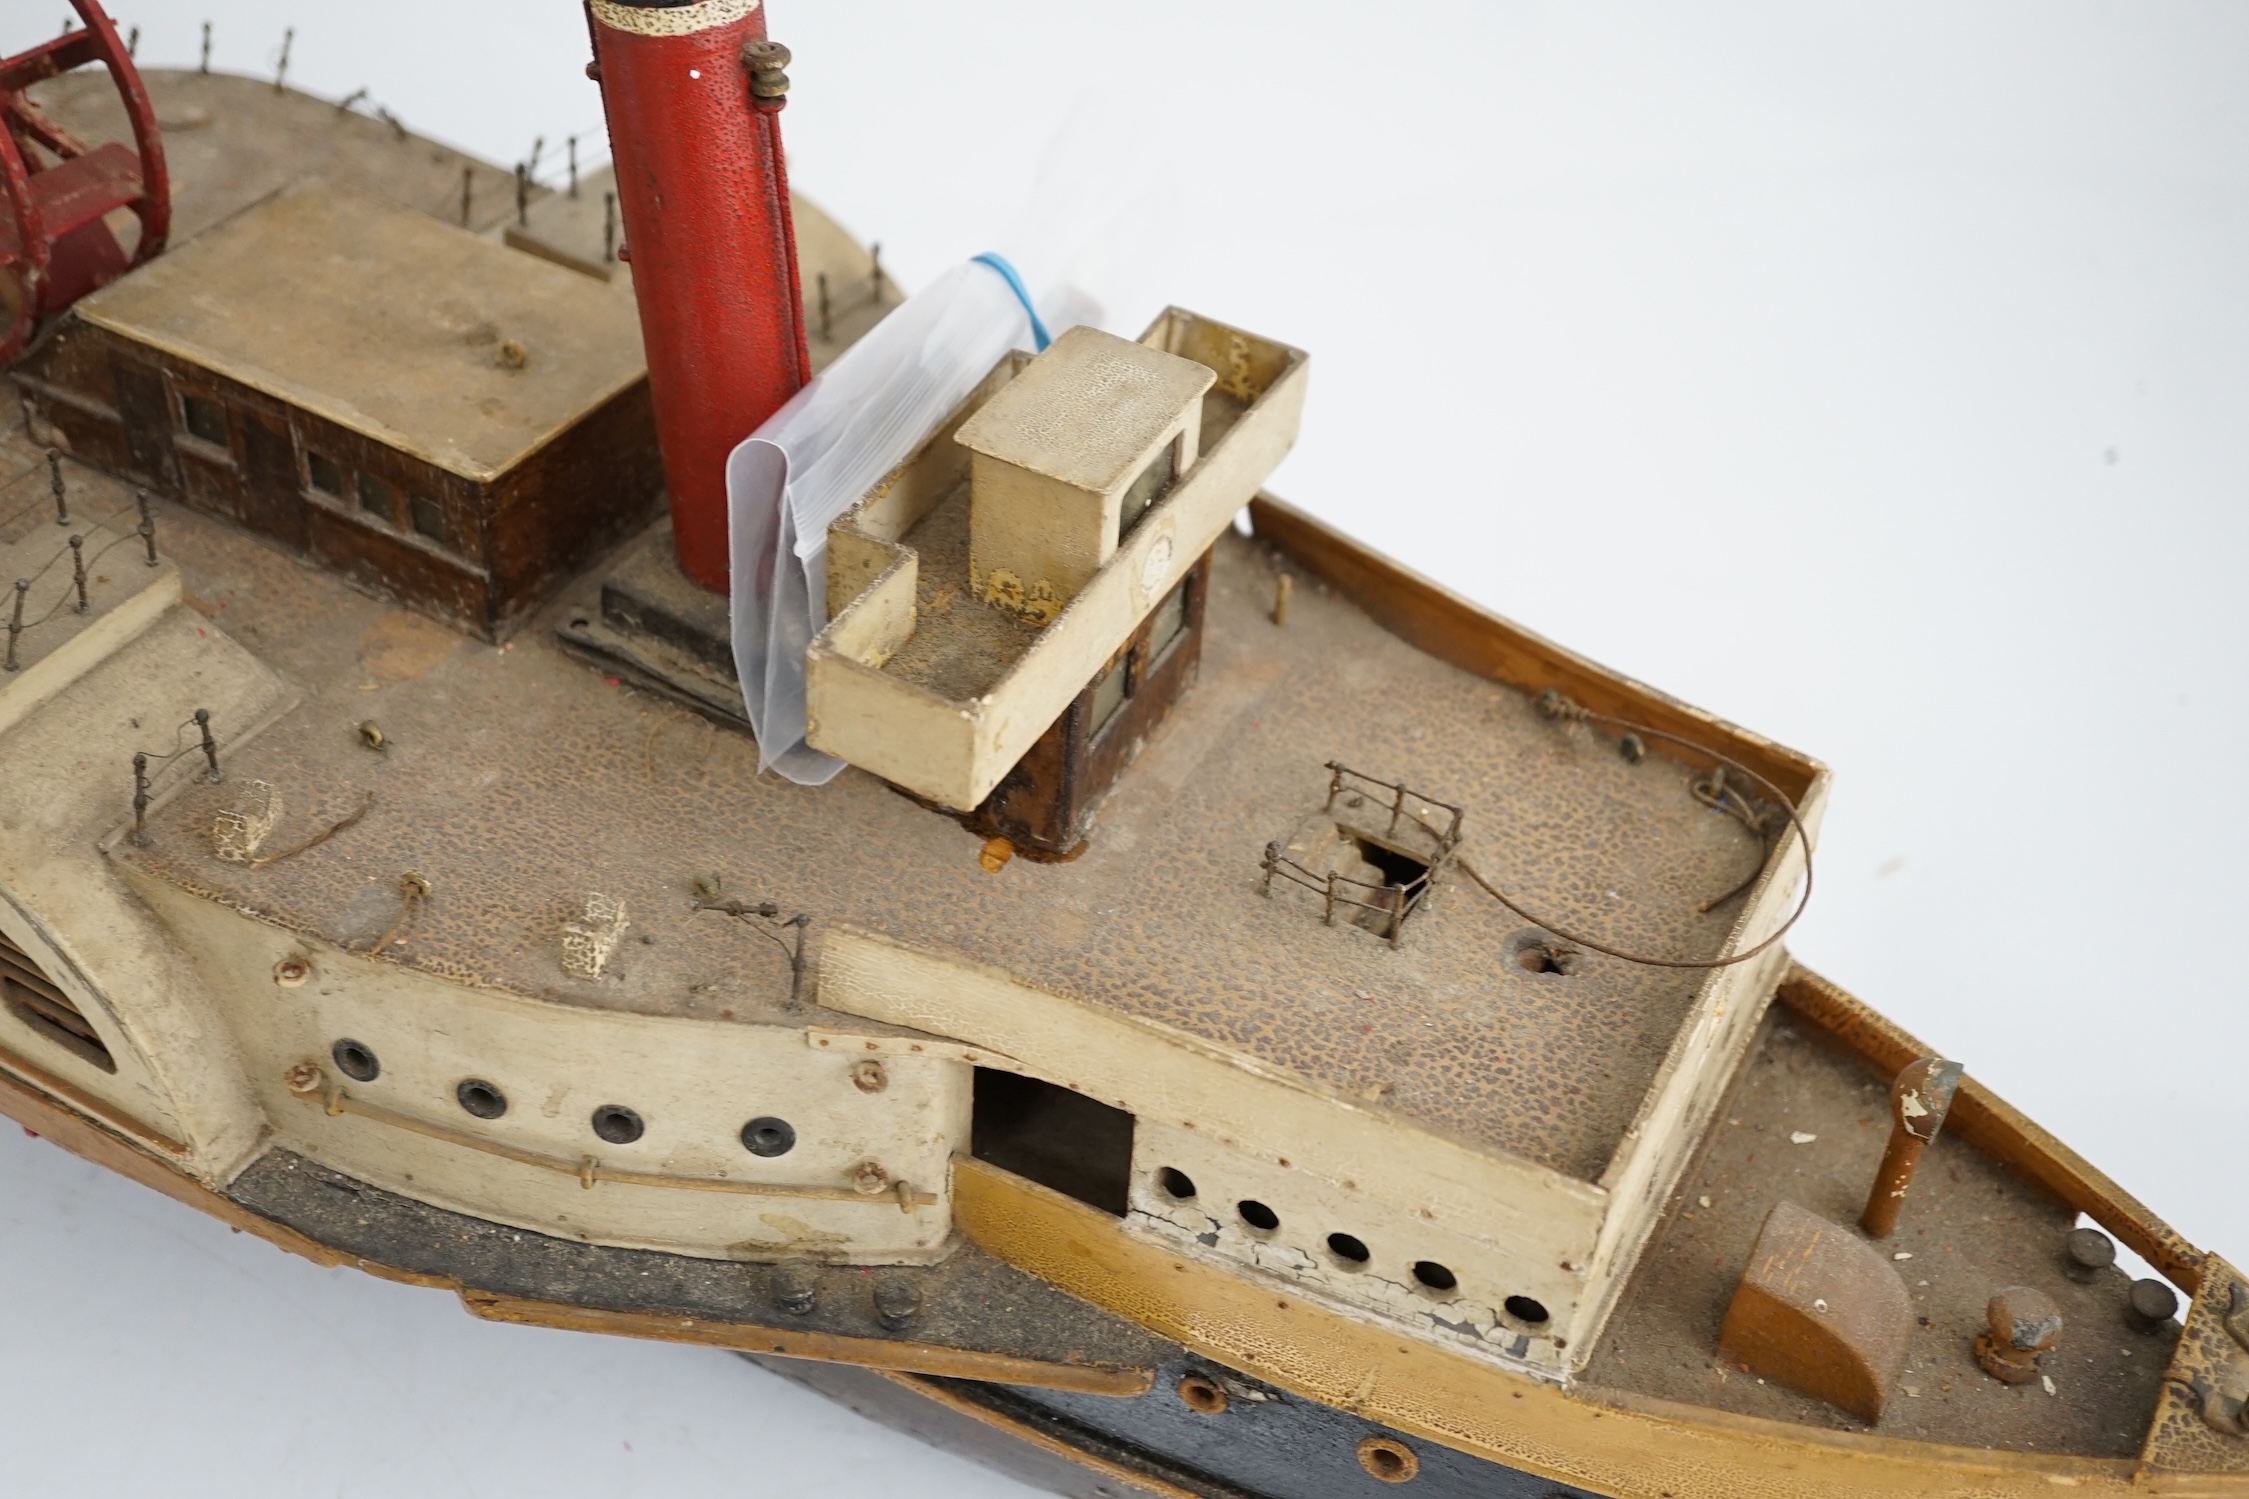 A wooden model of a paddle steamer, with a well detailed deck and with some age to the model, however now requiring some restoration, 80cm long